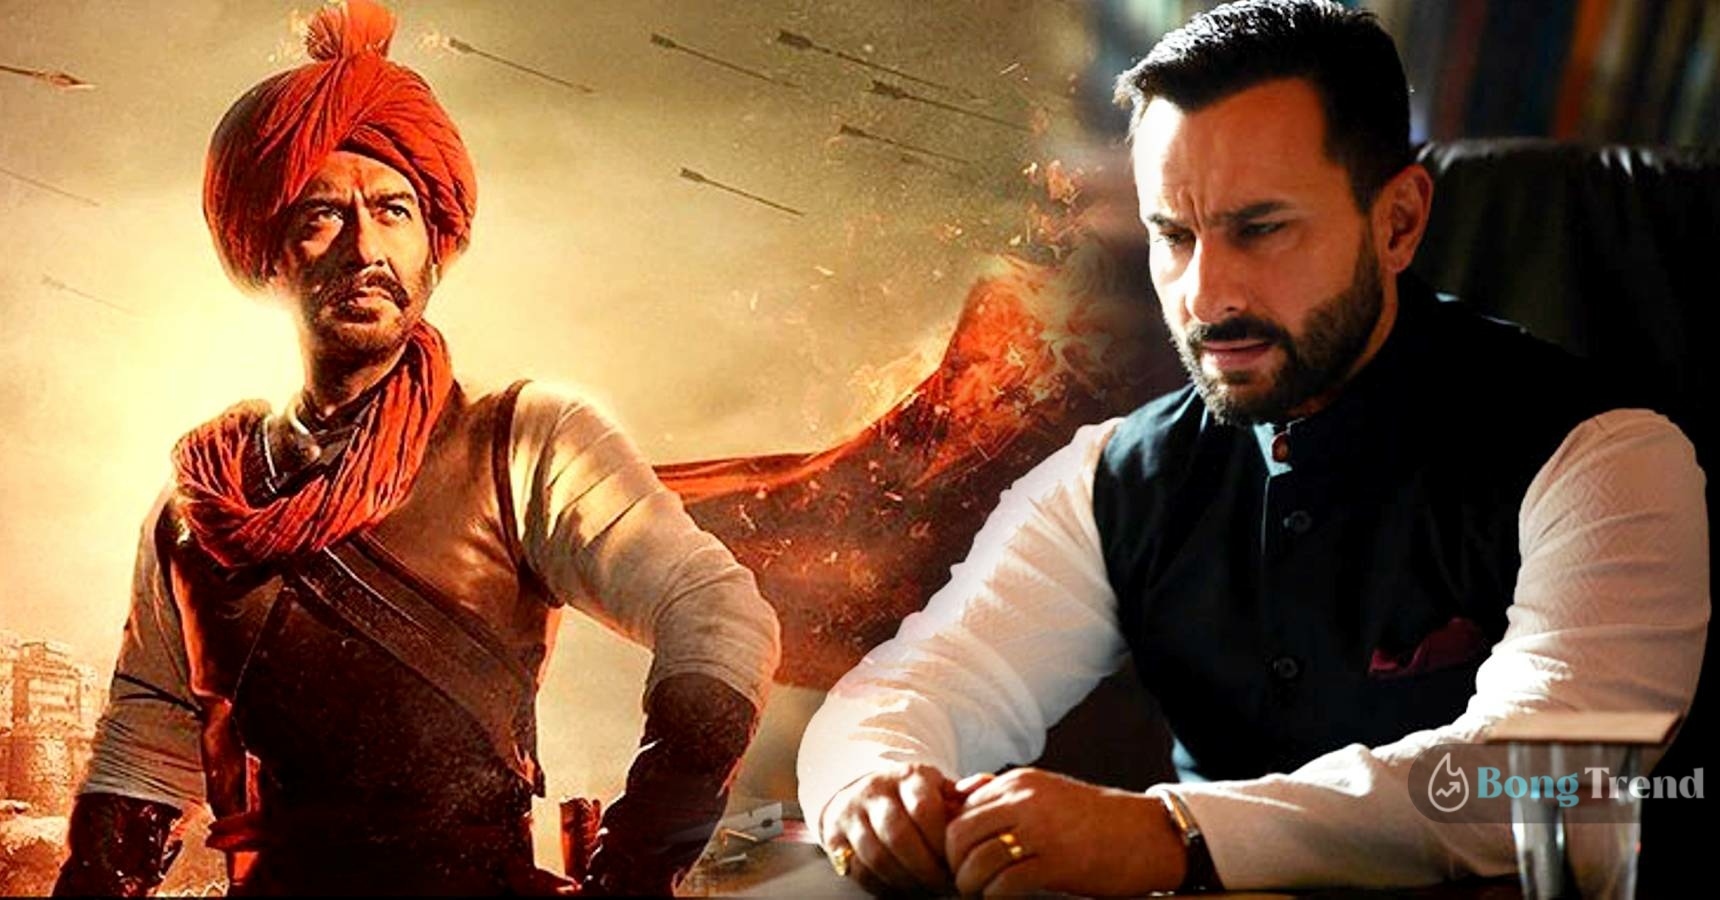 Saif Ali Khan gets trolled for his comment on Tanhaji movie